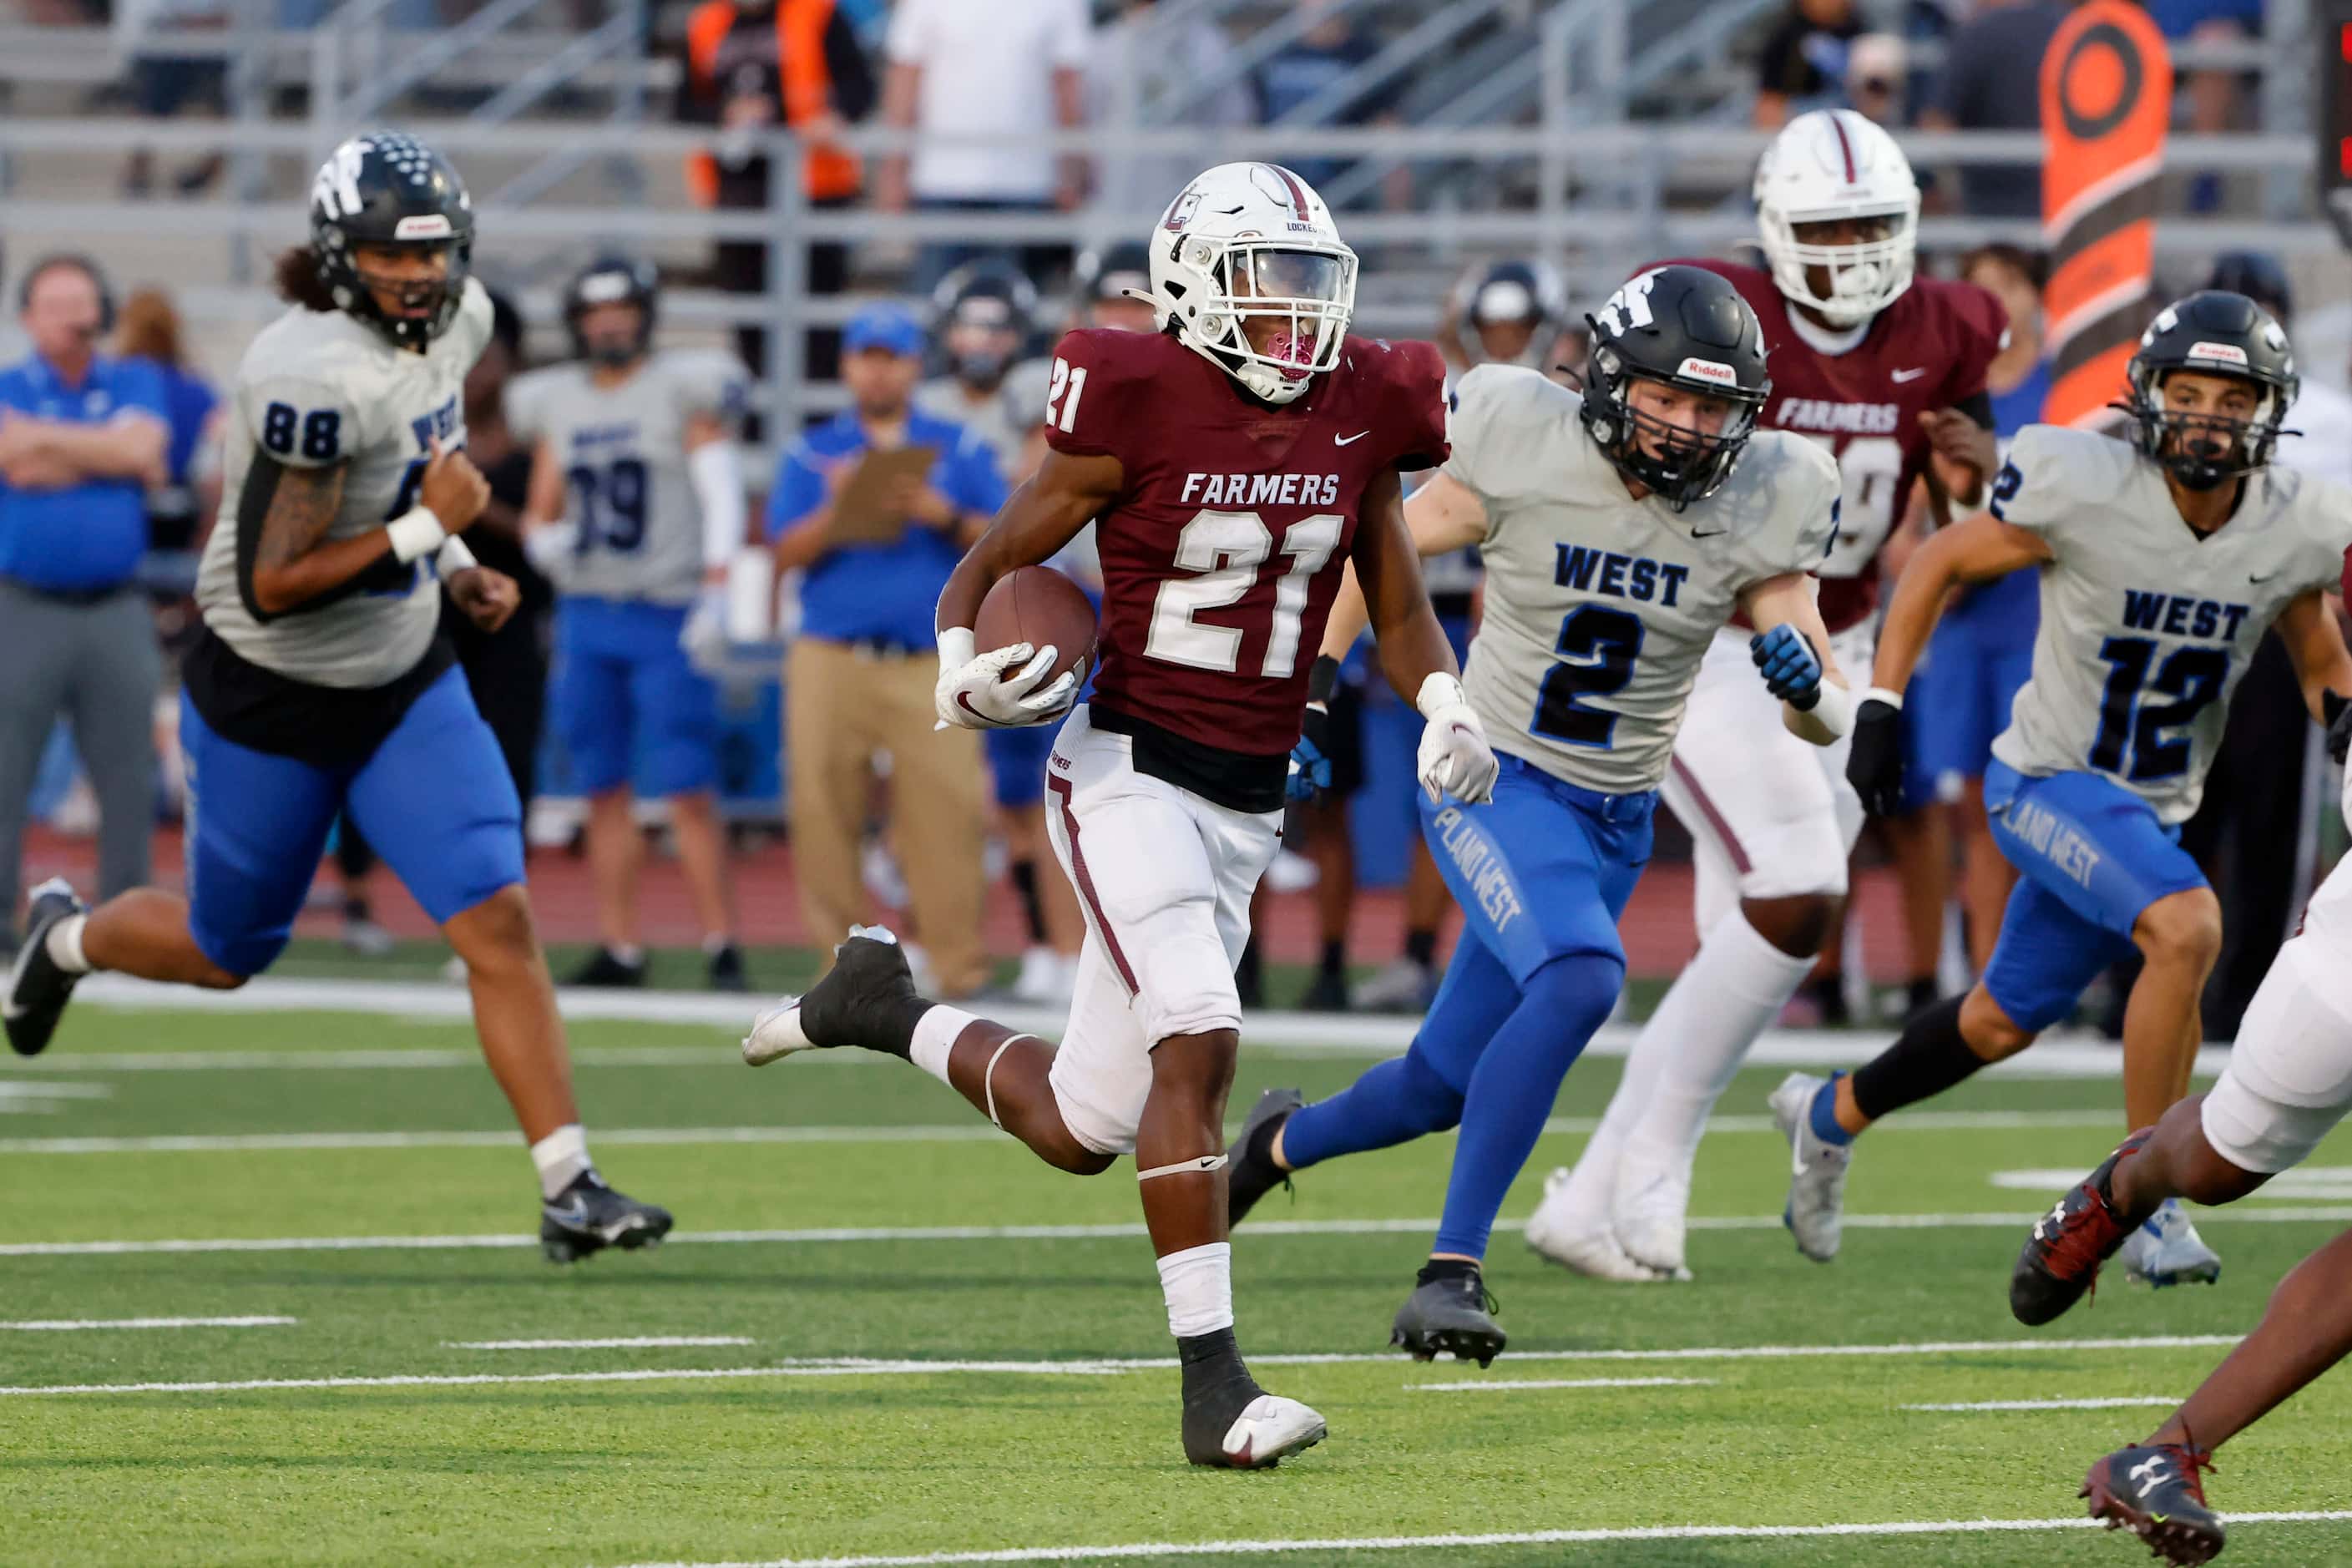 Lewisville running back Viron Ellison is chased by Plano West defender Reese Gunby (2) as he...